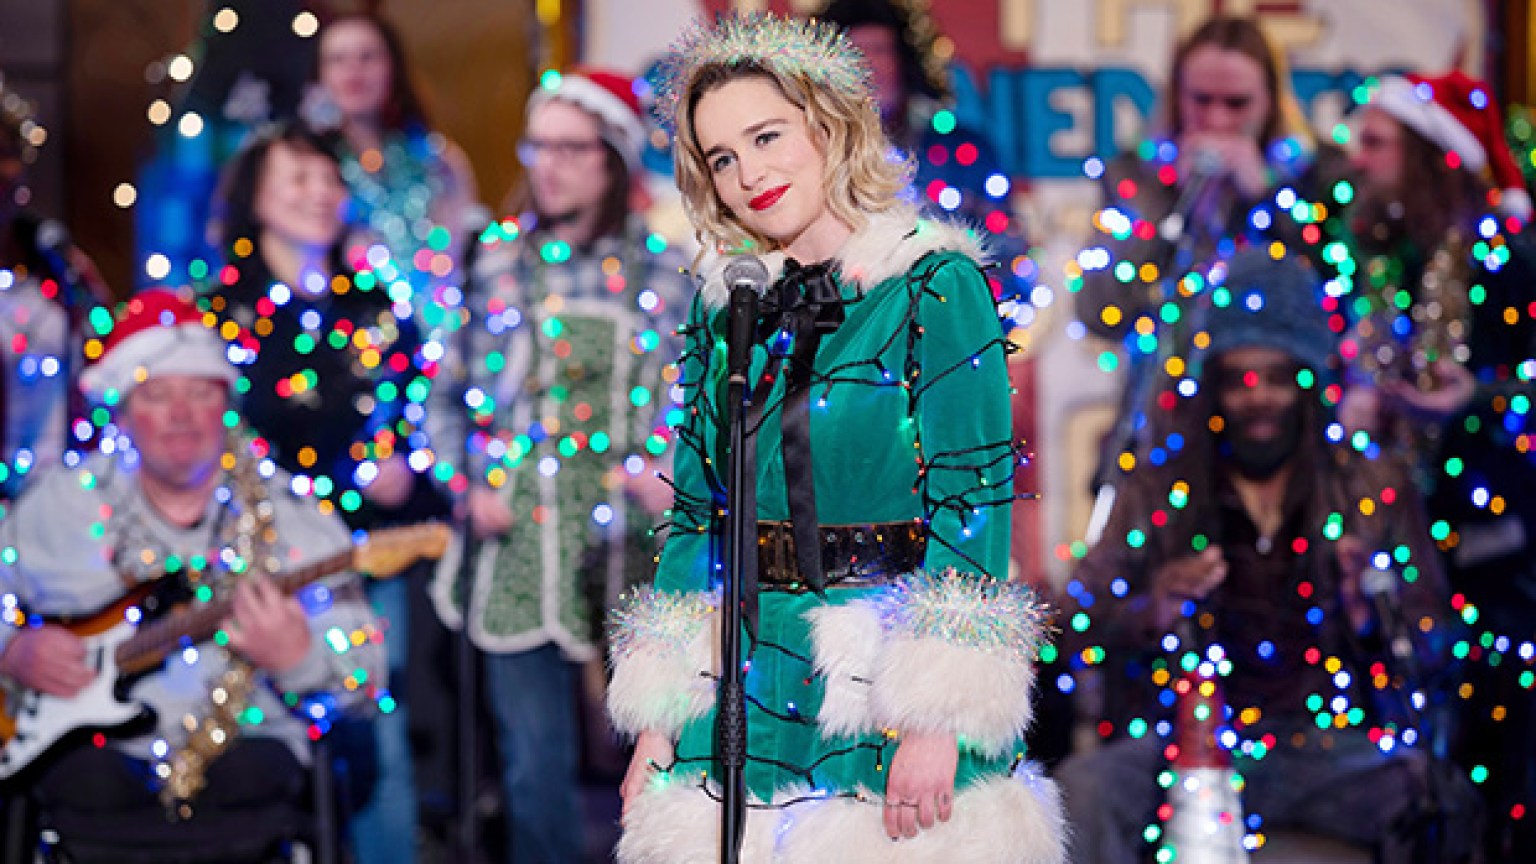 '25 Days Of Christmas' Schedule 2022: See The Full Lineup Of Holiday